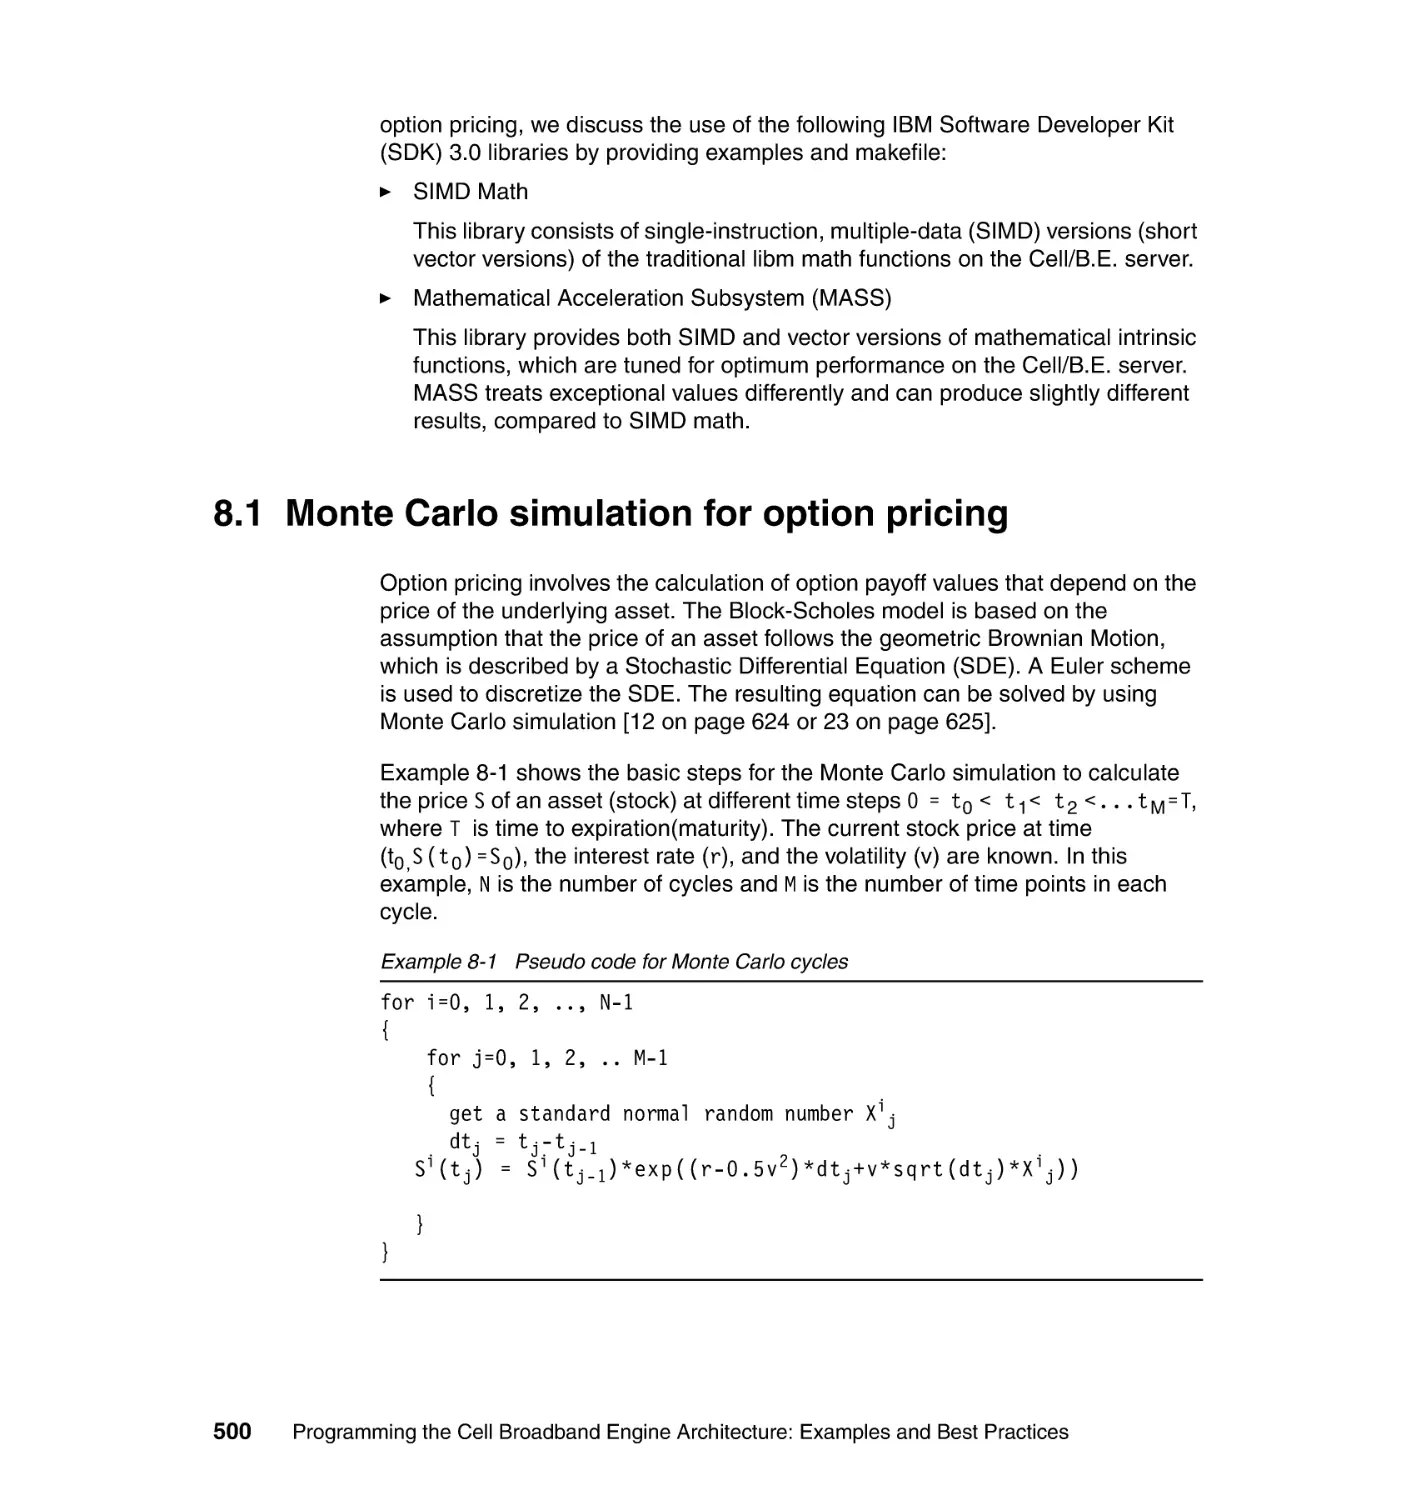 8.1 Monte Carlo simulation for option pricing